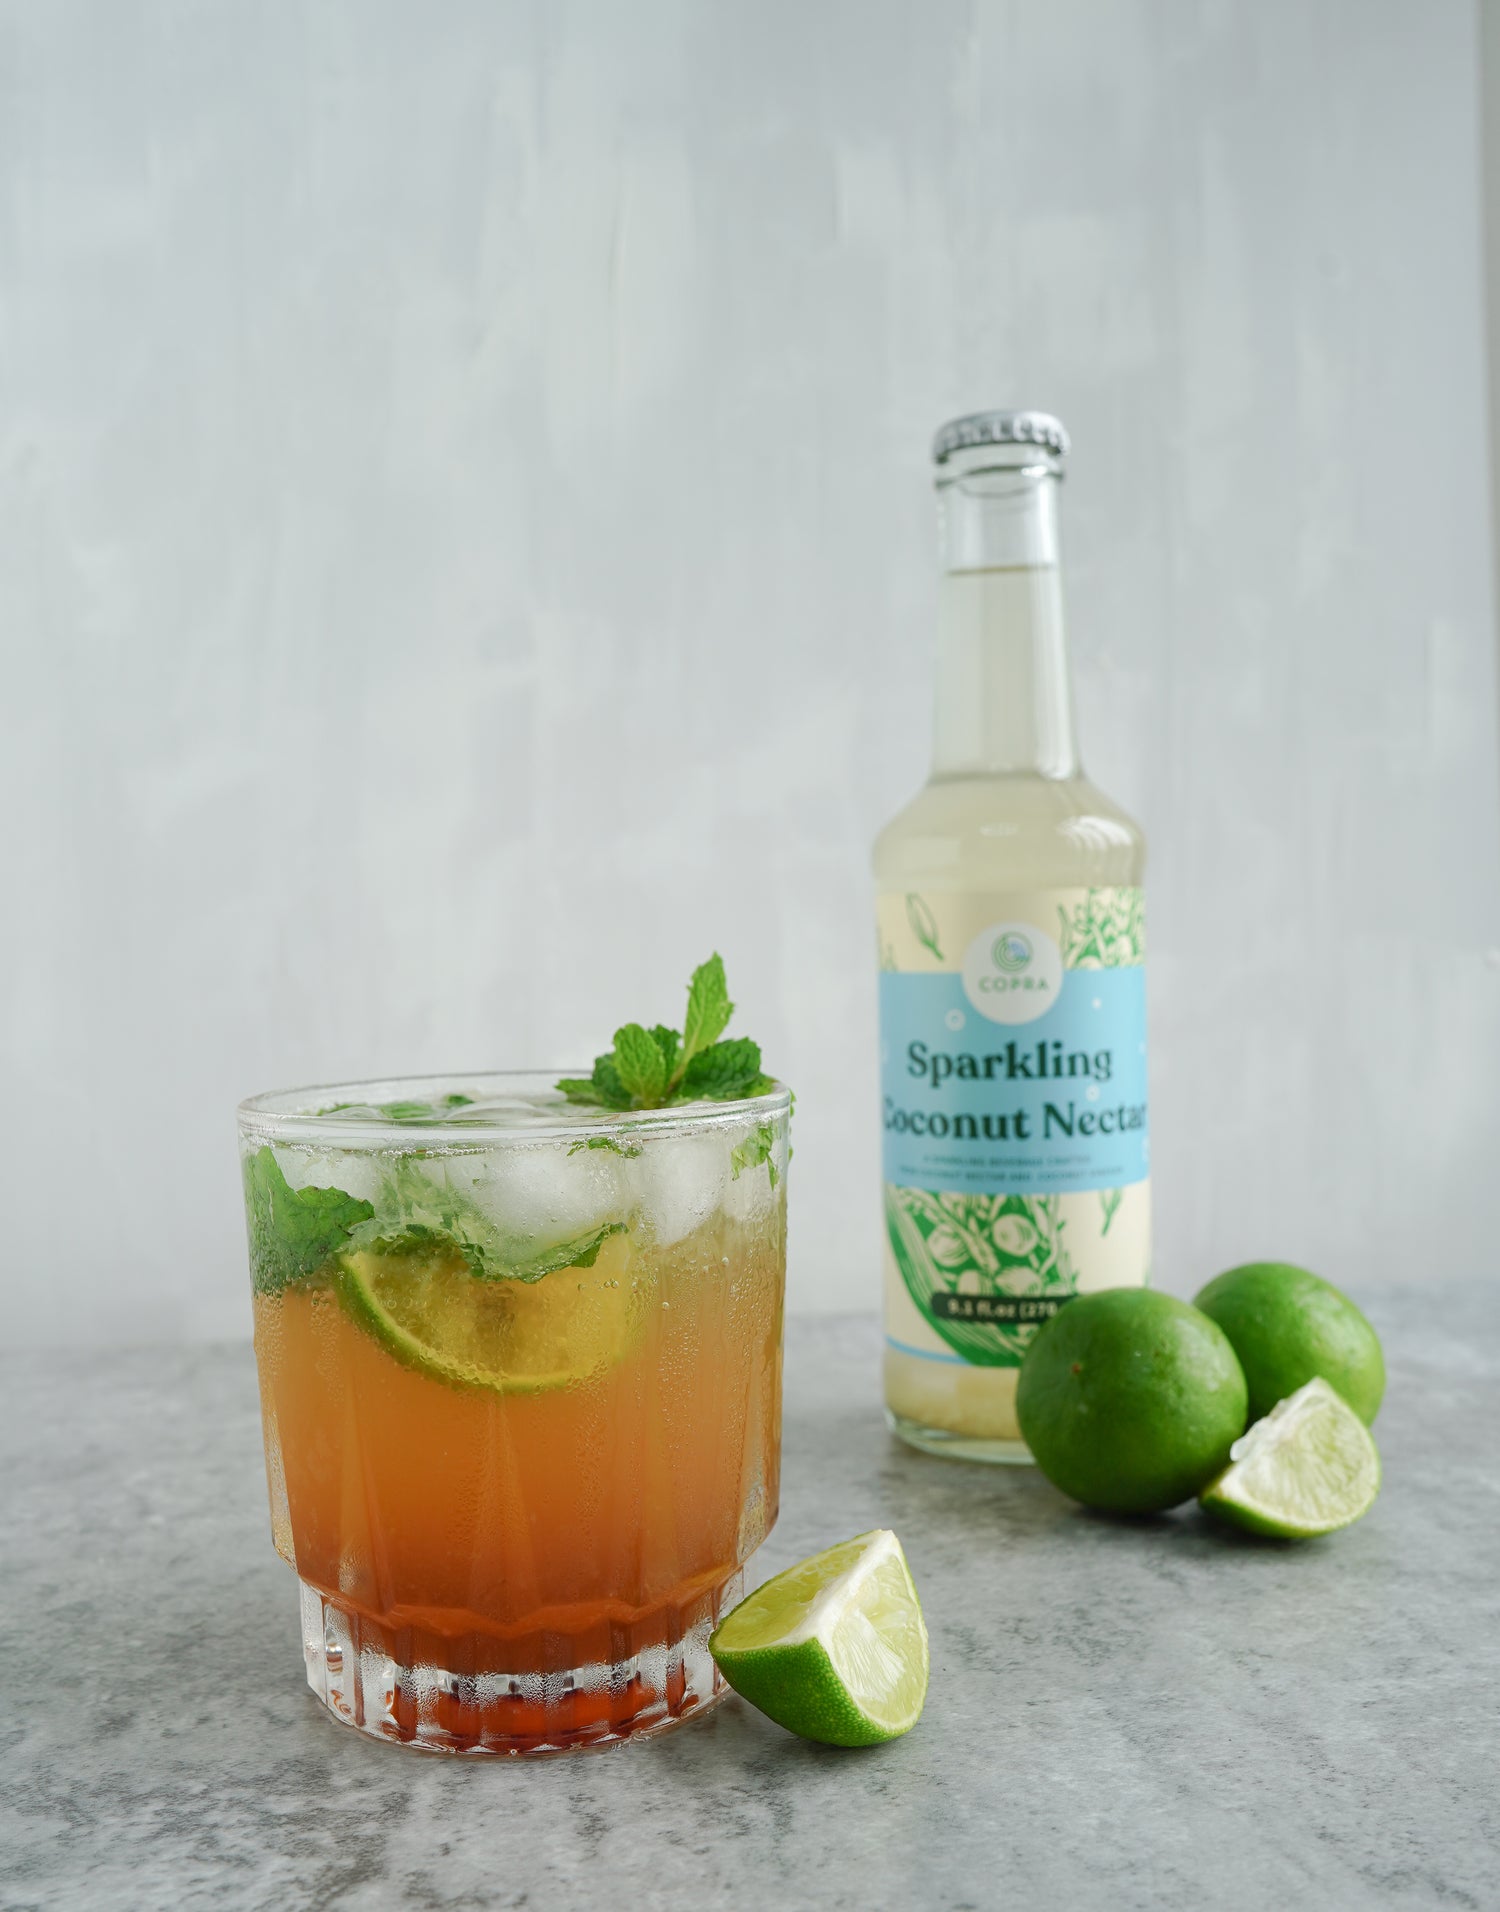 Copra Sparkling Coconut Nectar bottle next to a a glass containing a mixed drink with limes and mint.